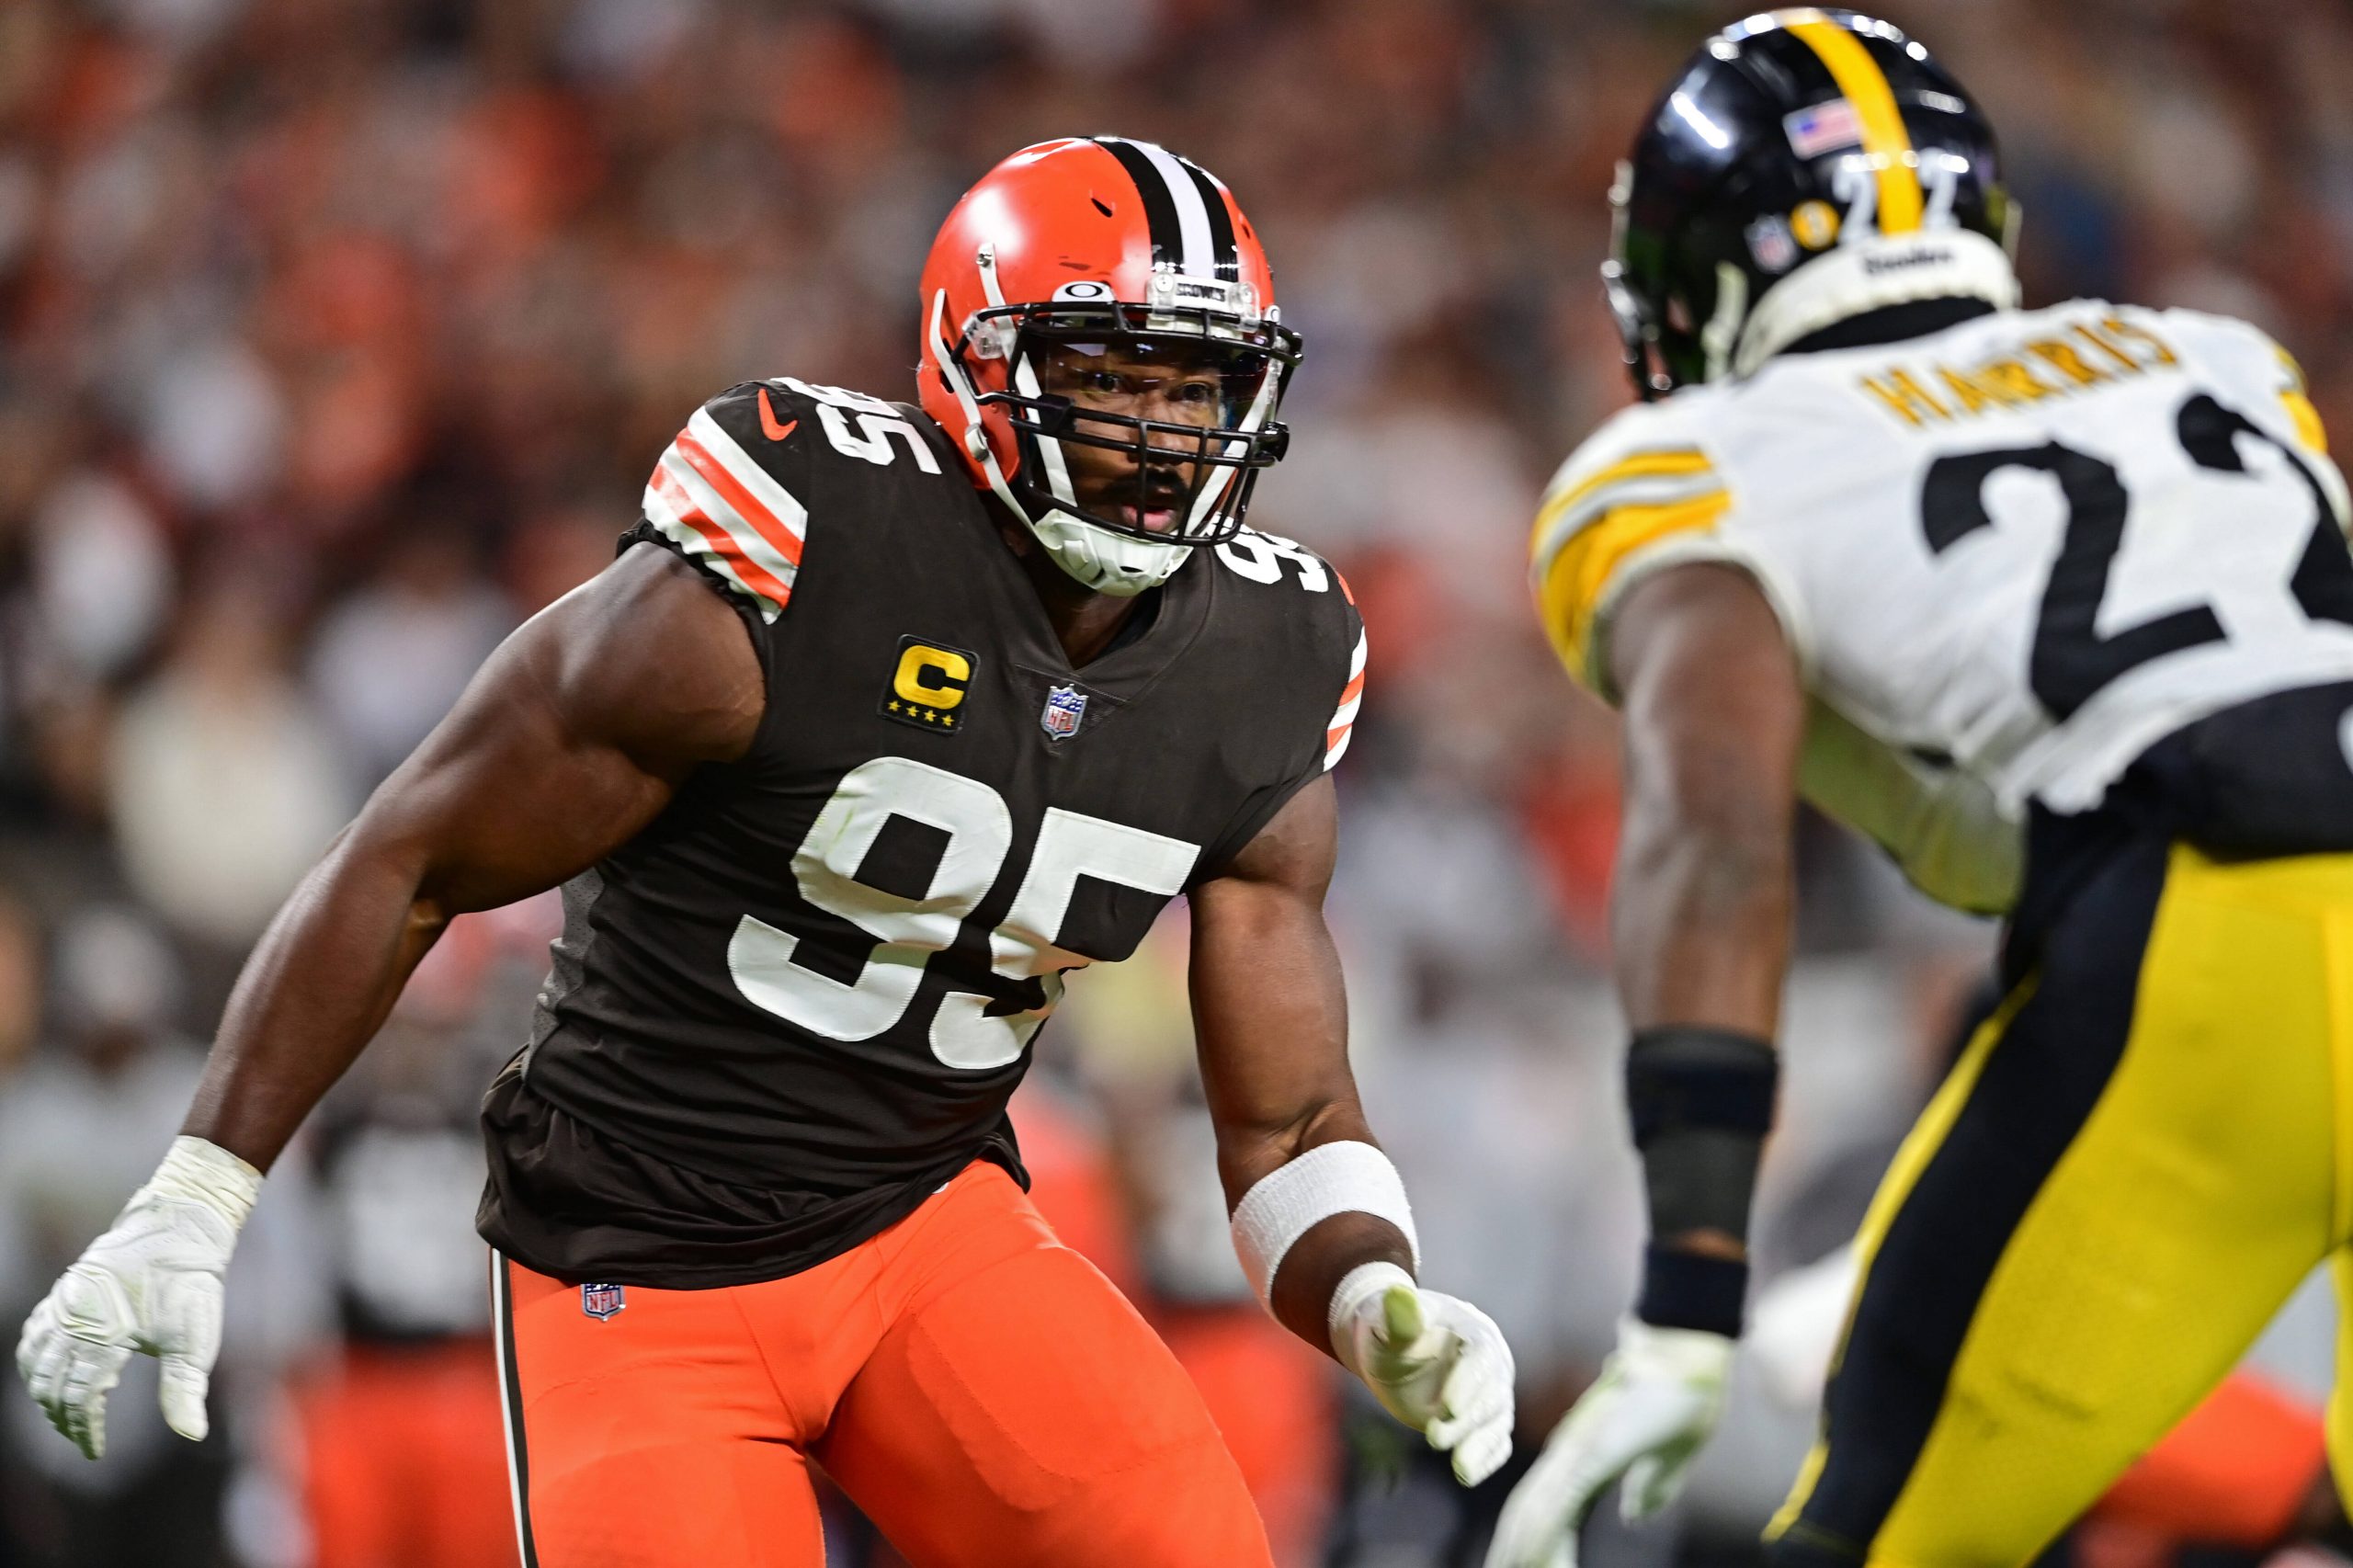 NFL, American Football Herren, USA Pittsburgh Steelers at Cleveland Browns Sep 22, 2022 Cleveland, Ohio, USA Cleveland Browns defensive end Myles Garrett 95 rushes the passer during the fourth quarter against the Pittsburgh Steelers at FirstEnergy Stadium. Cleveland FirstEnergy Stadium Ohio USA, EDITORIAL USE ONLY PUBLICATIONxINxGERxSUIxAUTxONLY Copyright: xDavidxDermerx 20220922_jcd_da4_339